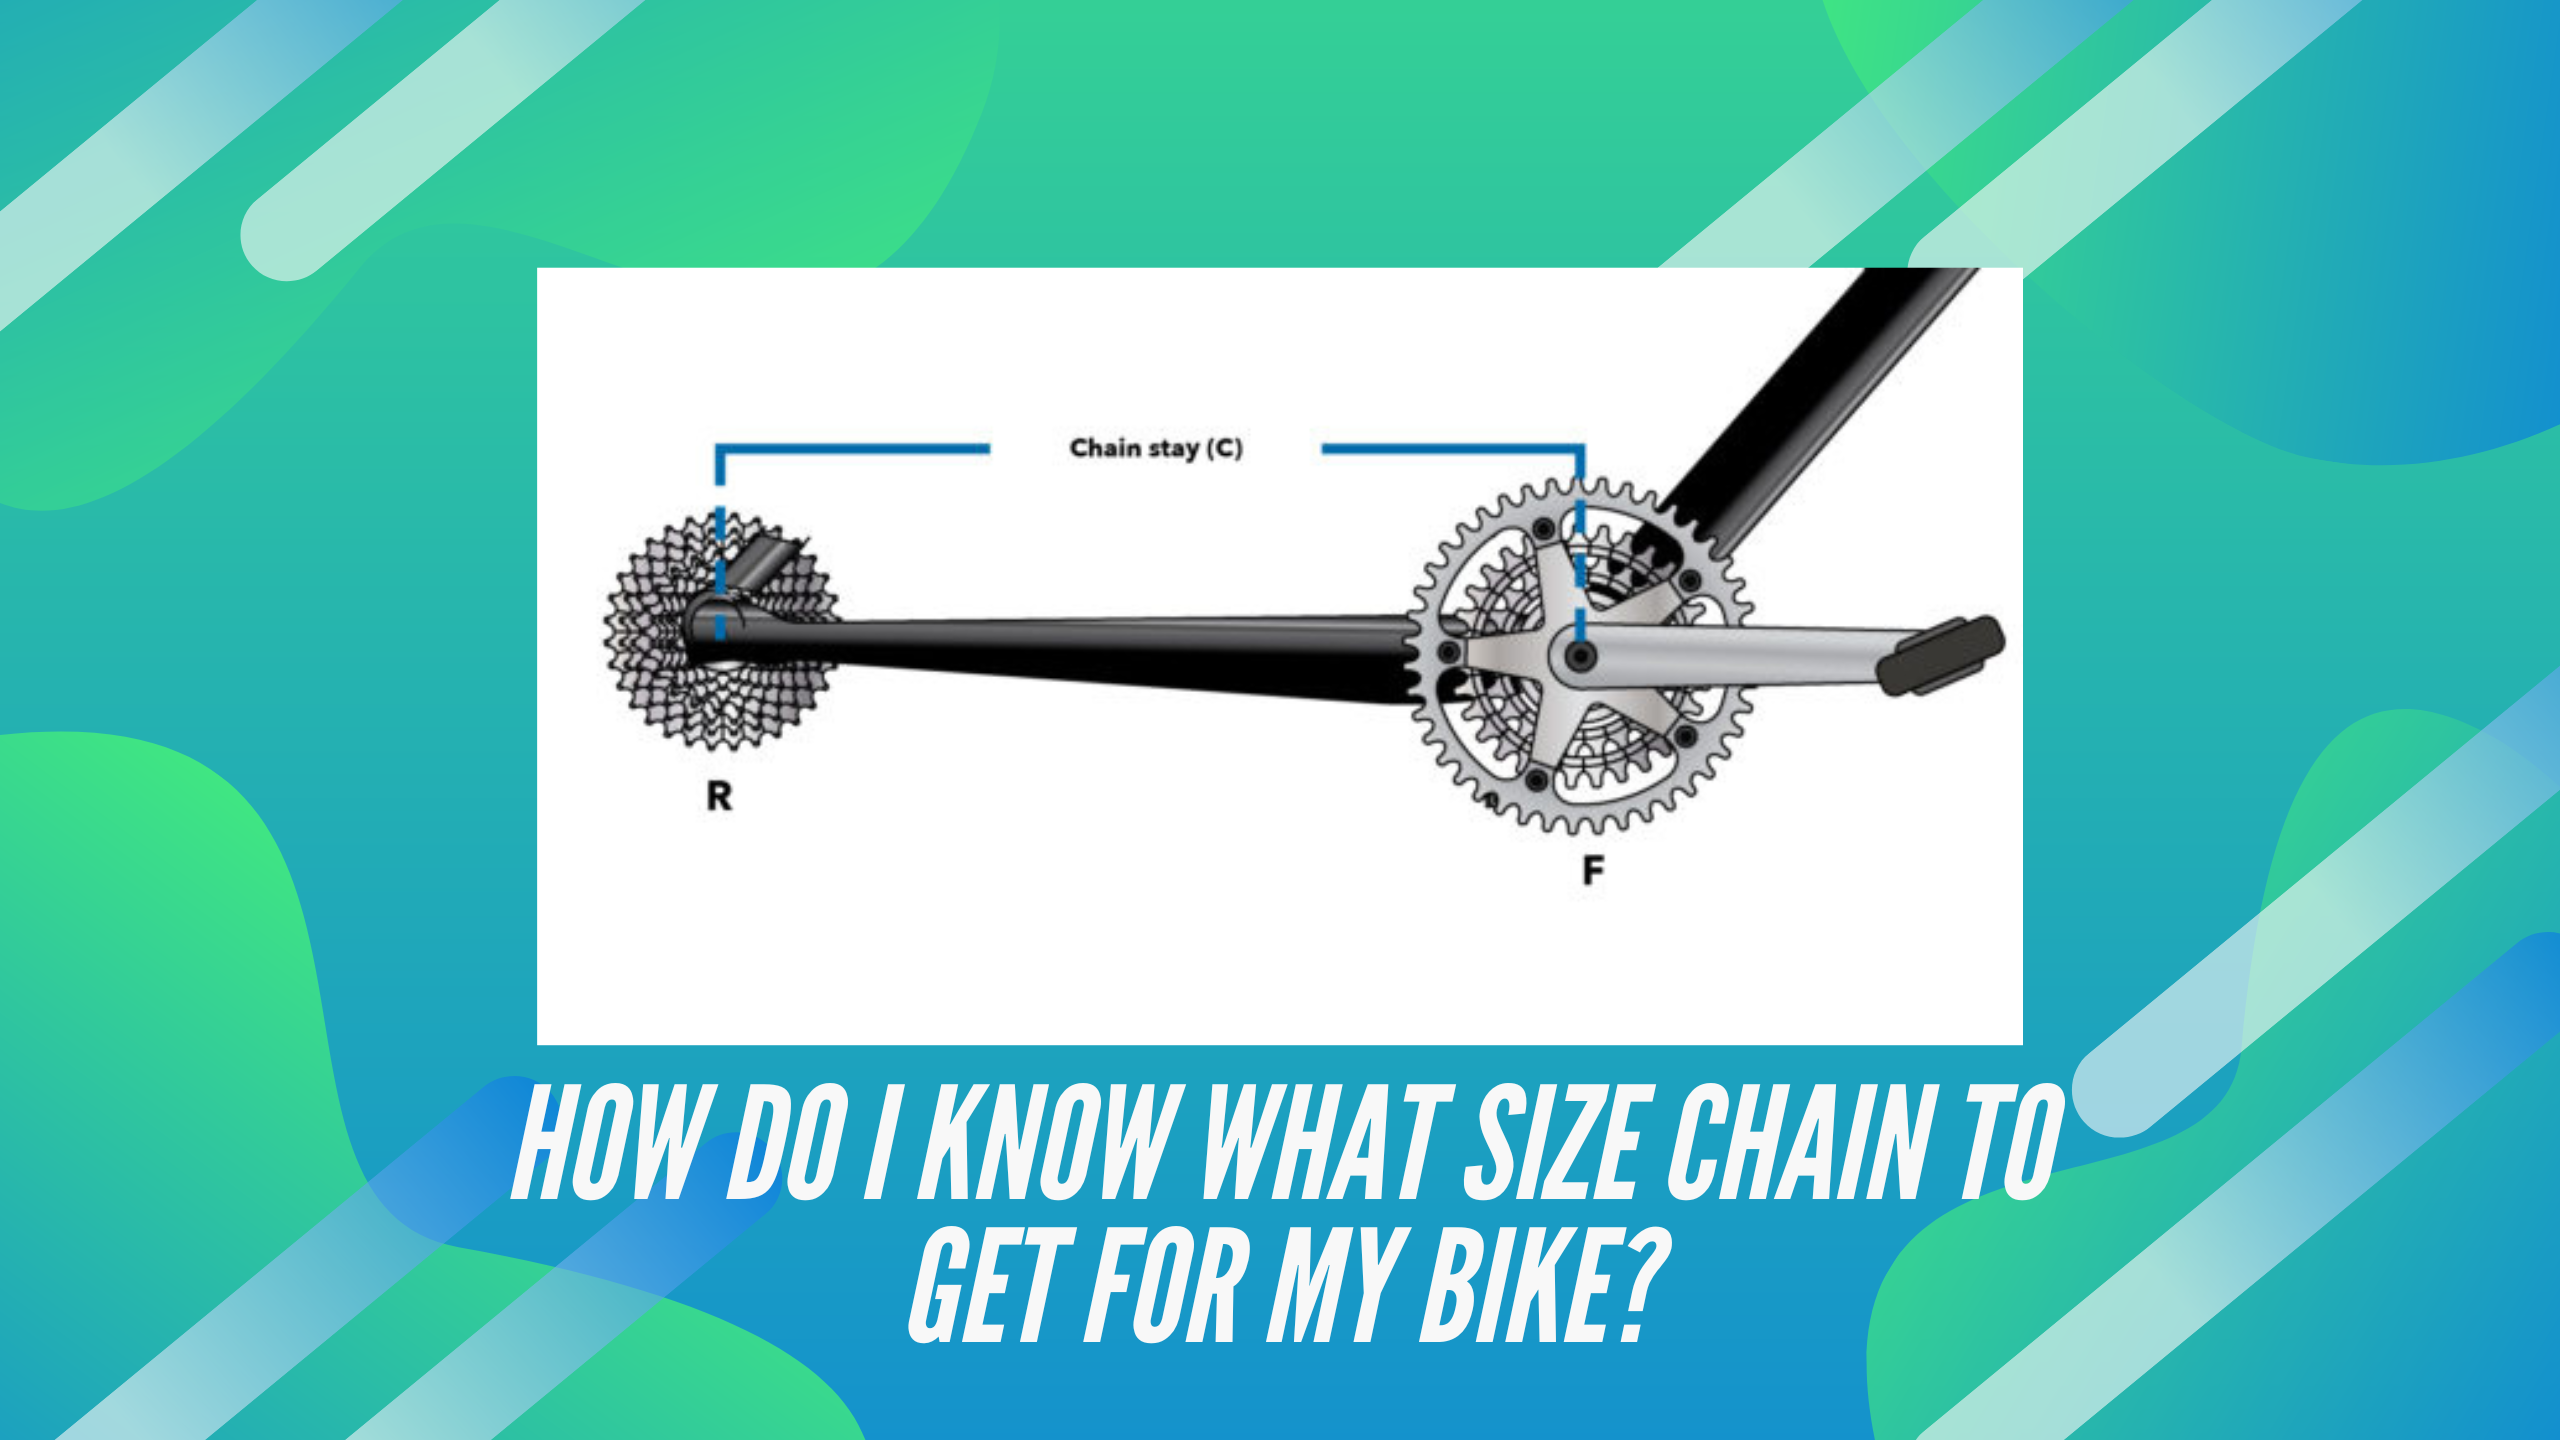 How Do I Know What Size Chain to Get for My Bike?